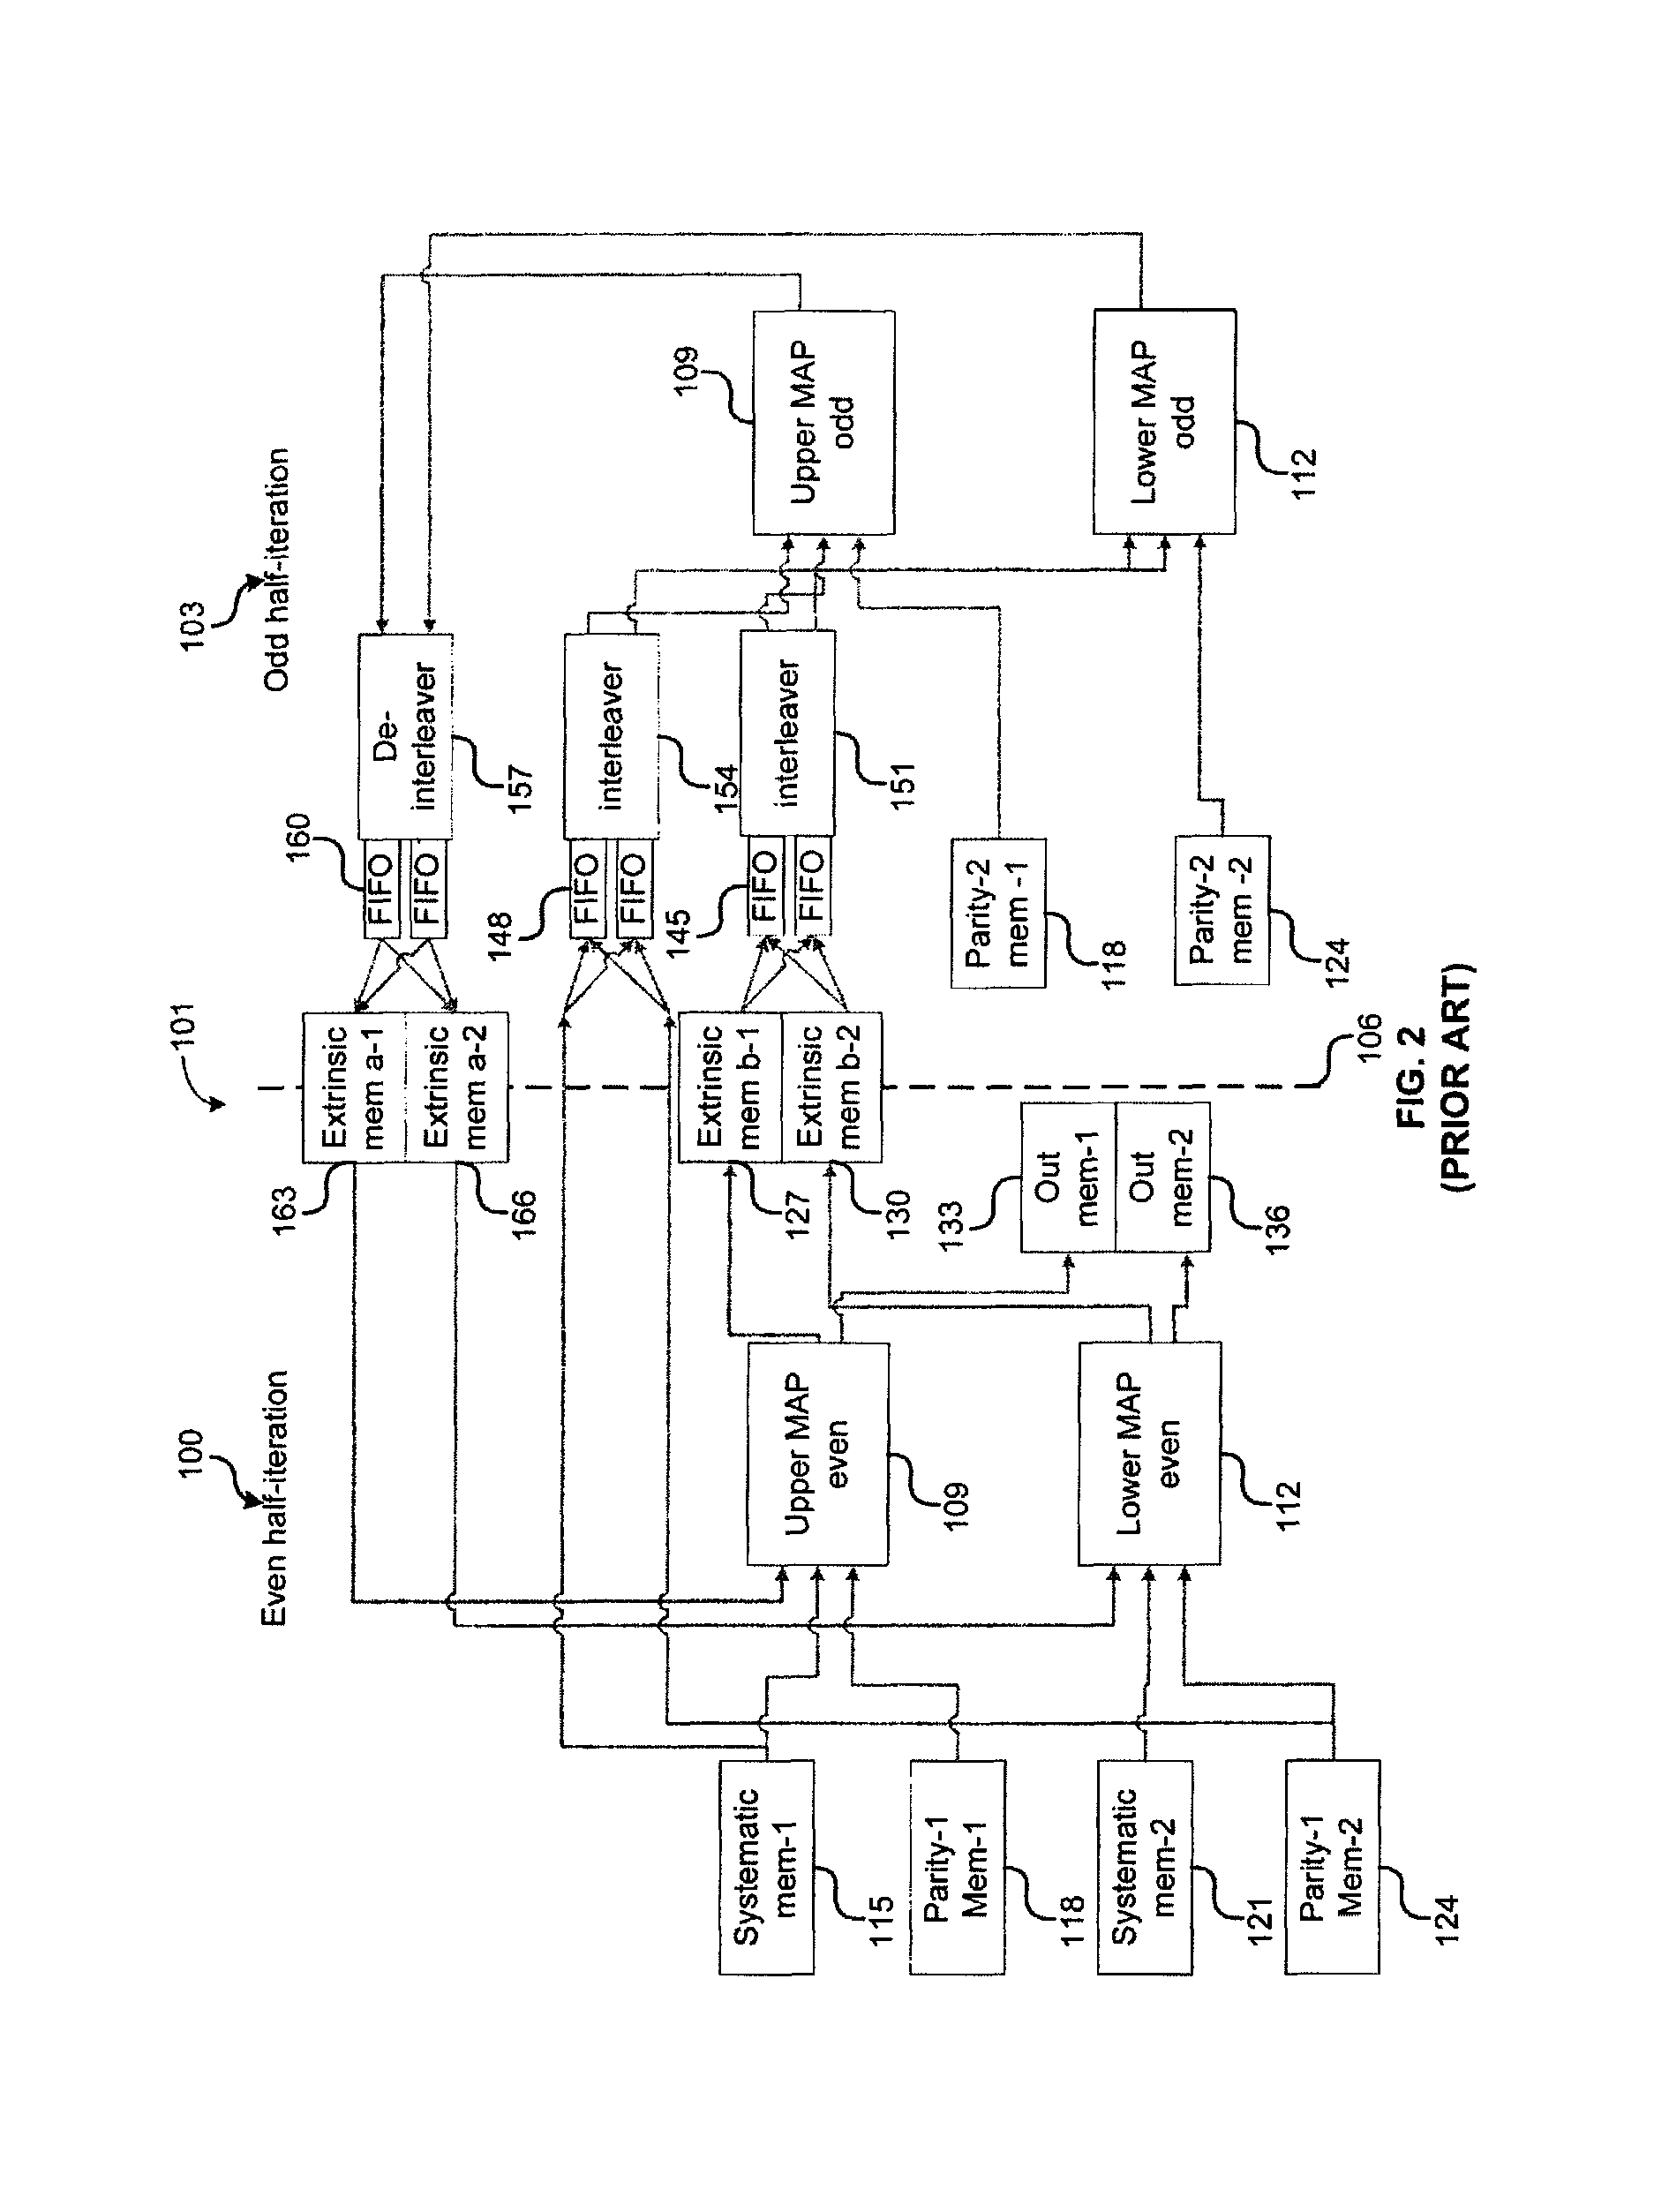 Systems and methods for parallel dual-mode turbo decoders